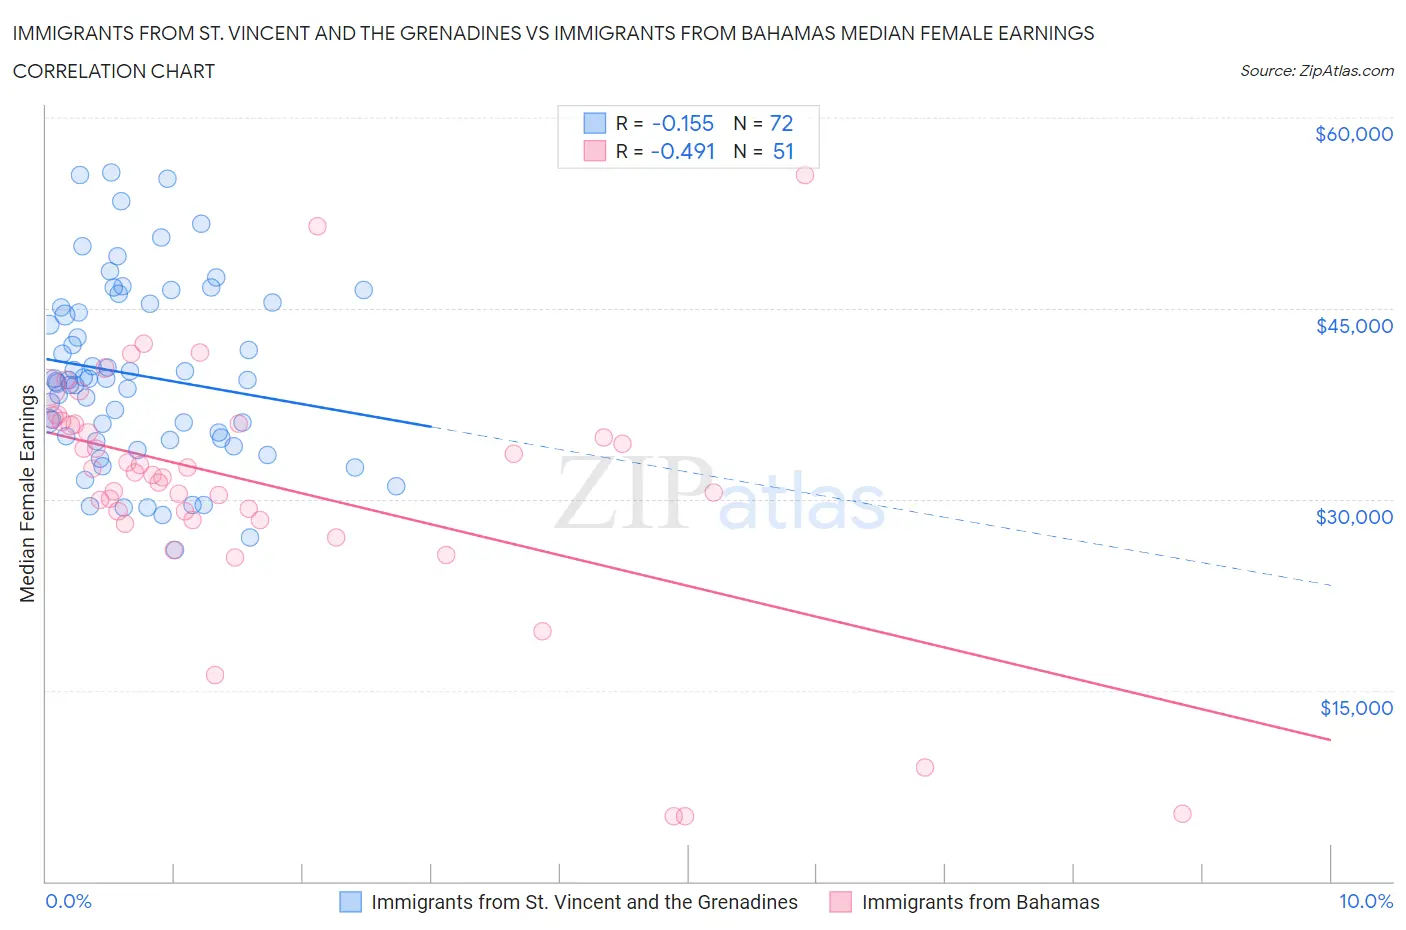 Immigrants from St. Vincent and the Grenadines vs Immigrants from Bahamas Median Female Earnings